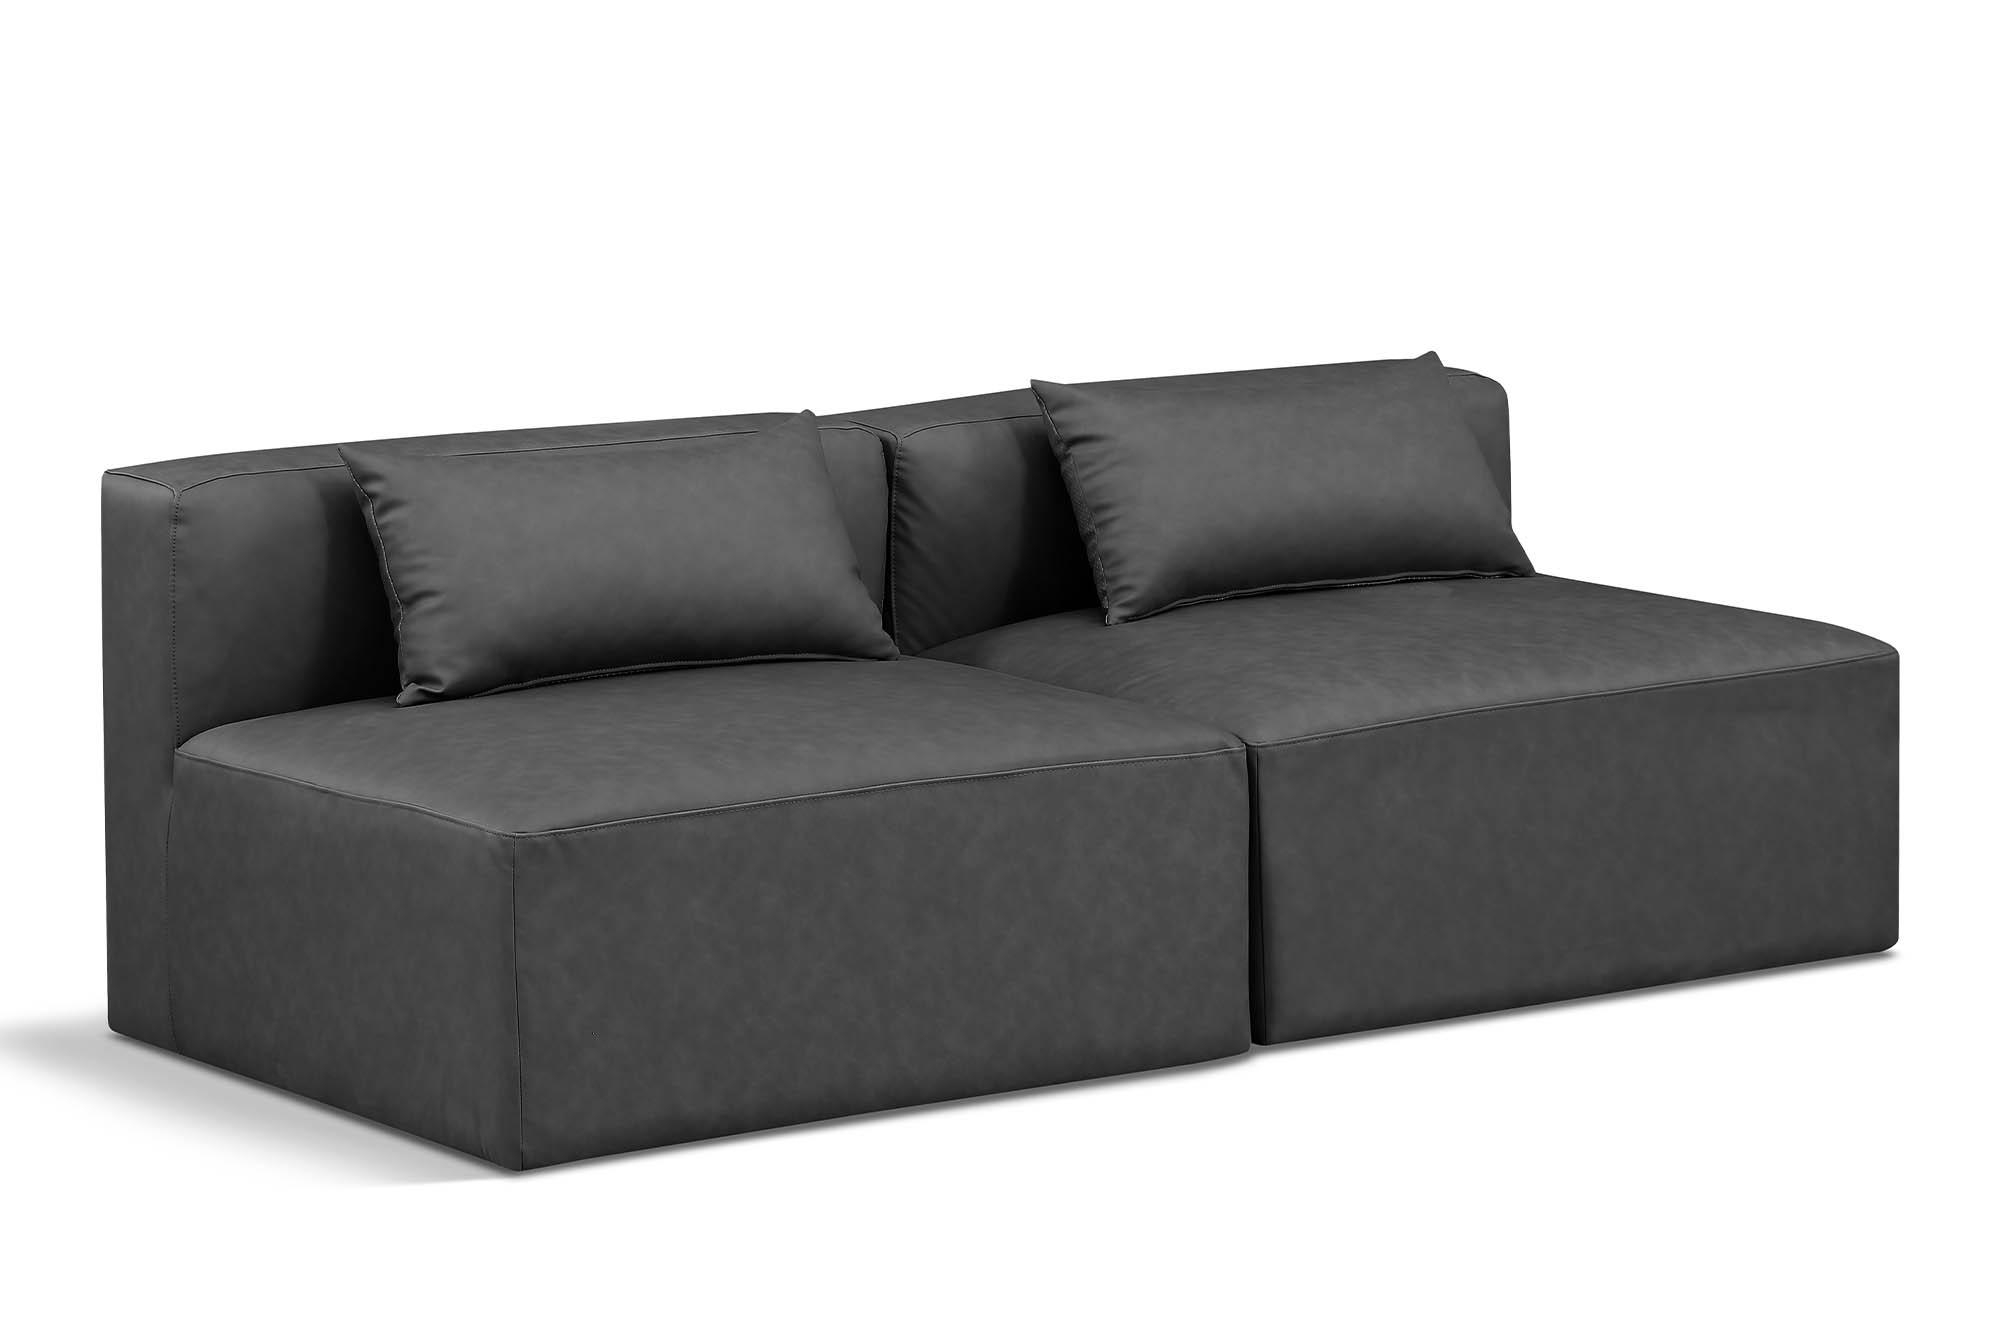 Contemporary, Modern Modular Sofa CUBE 668Grey-S72A 668Grey-S72A in Gray Faux Leather